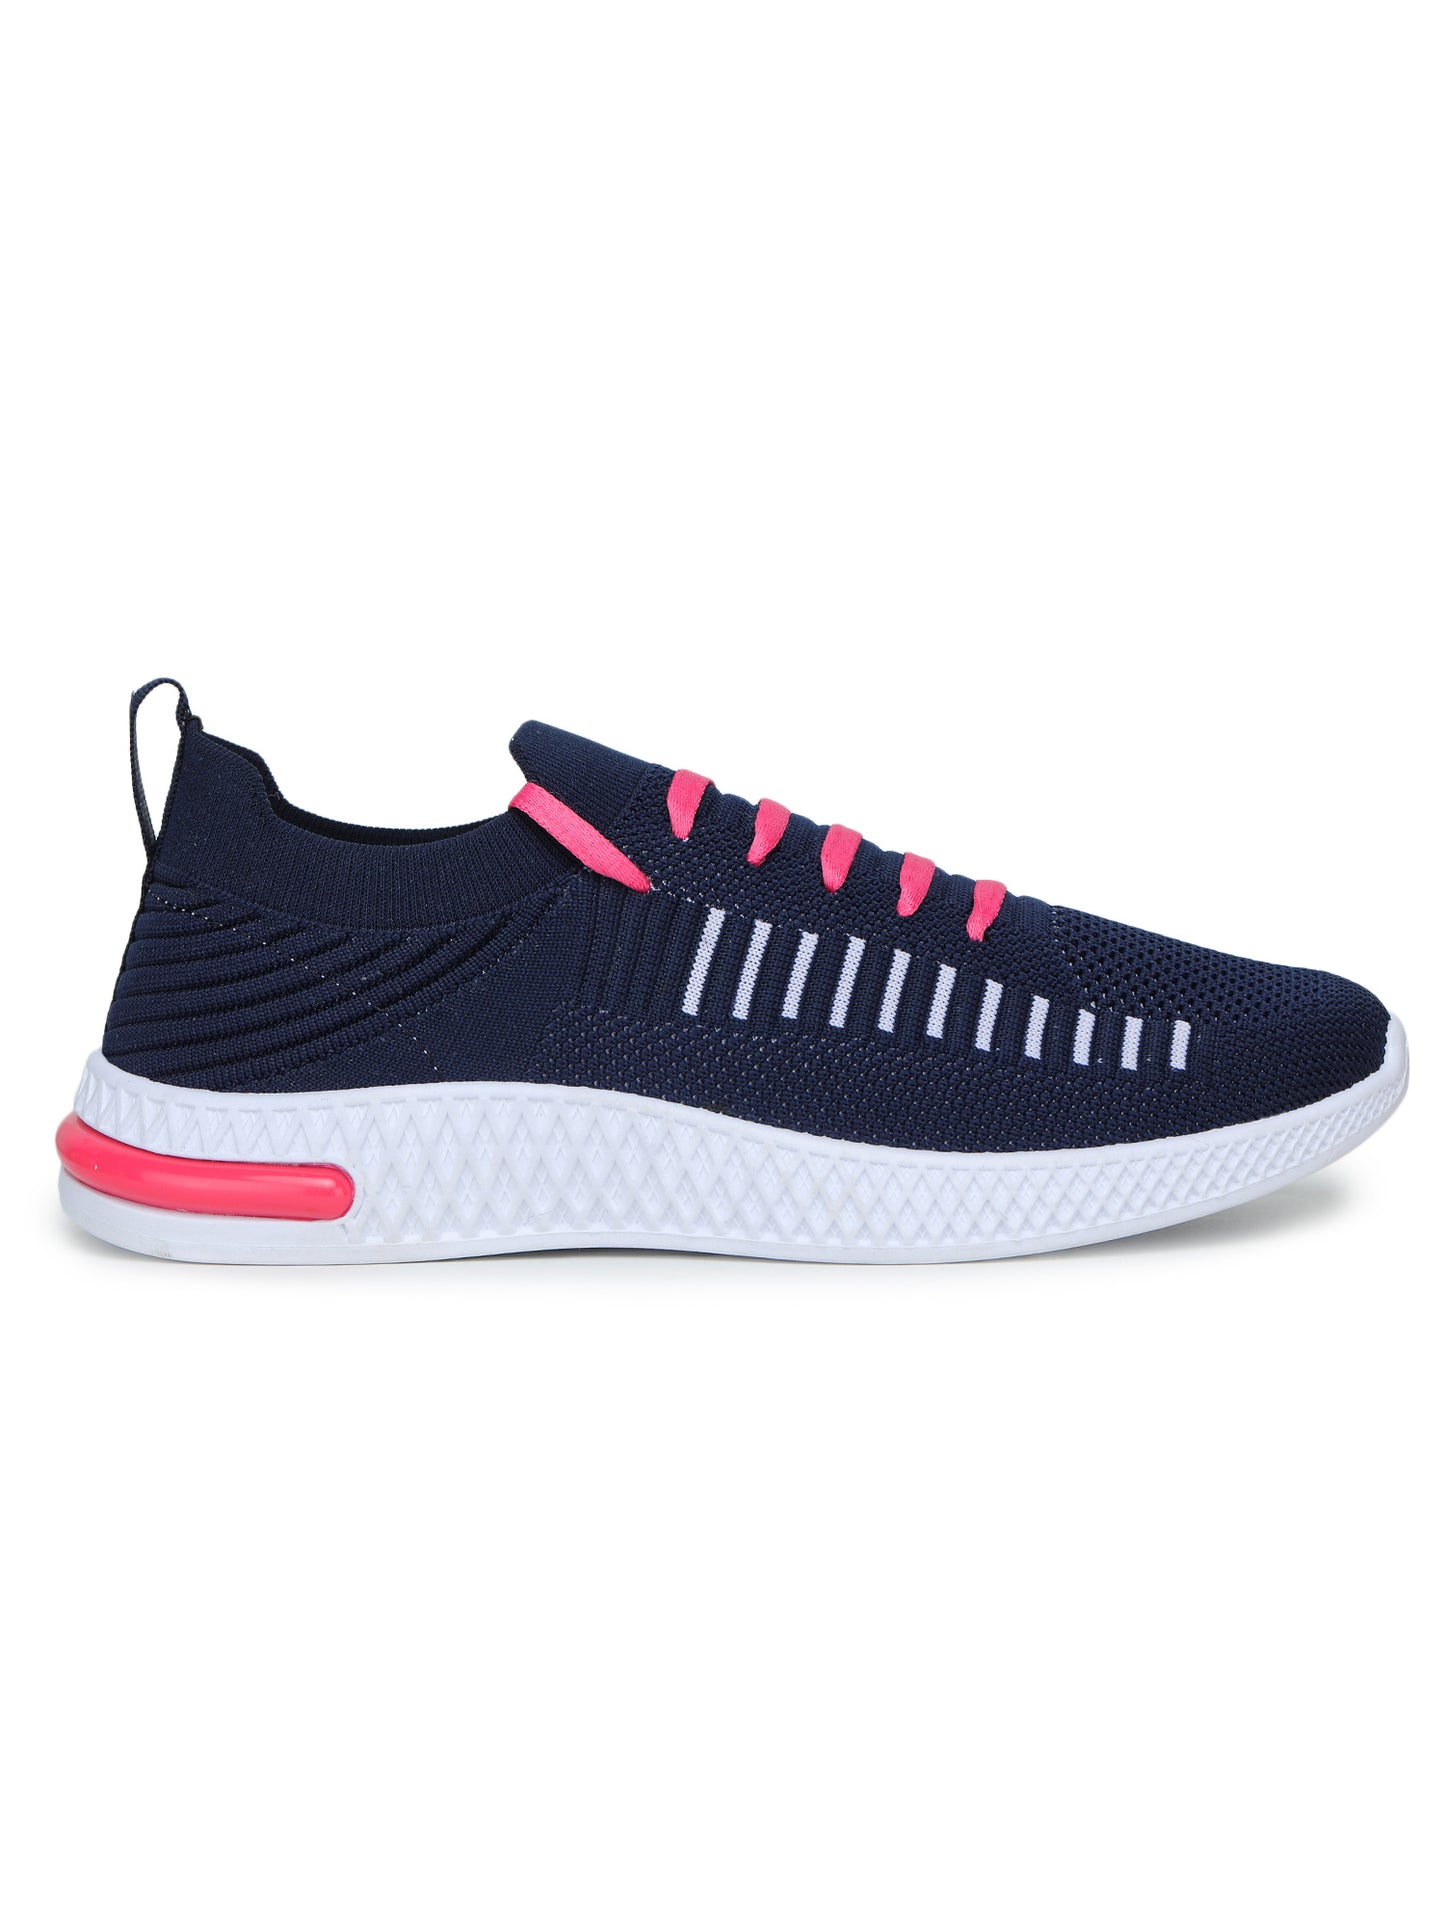 ABROS RYLE SPORTS SHOES  FOR WOMEN